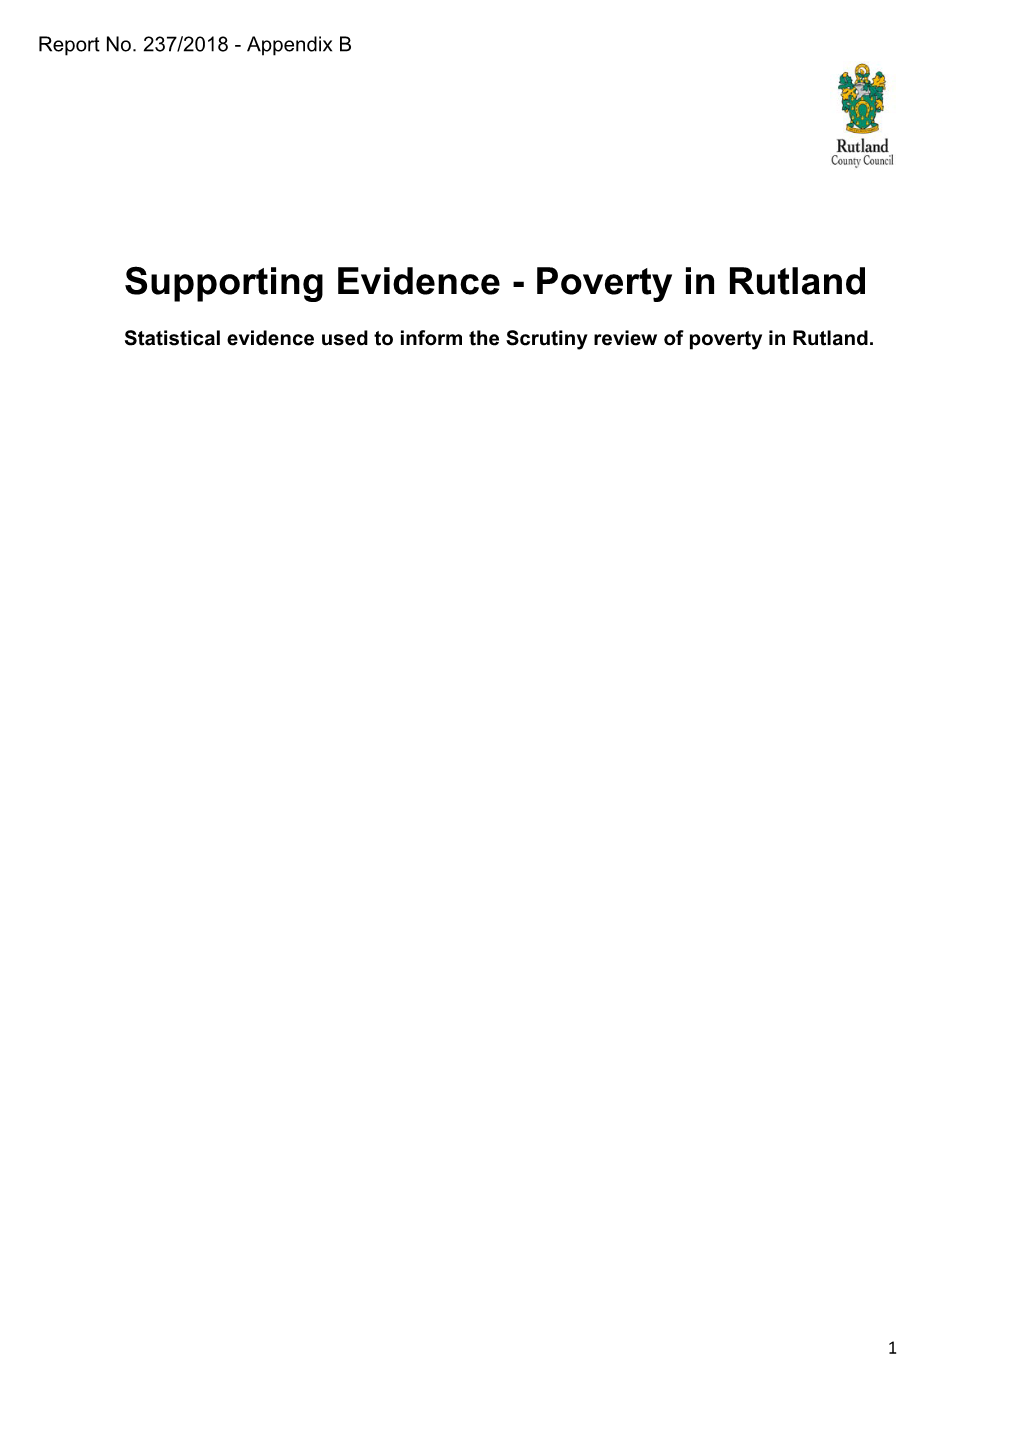 Supporting Evidence - Poverty in Rutland